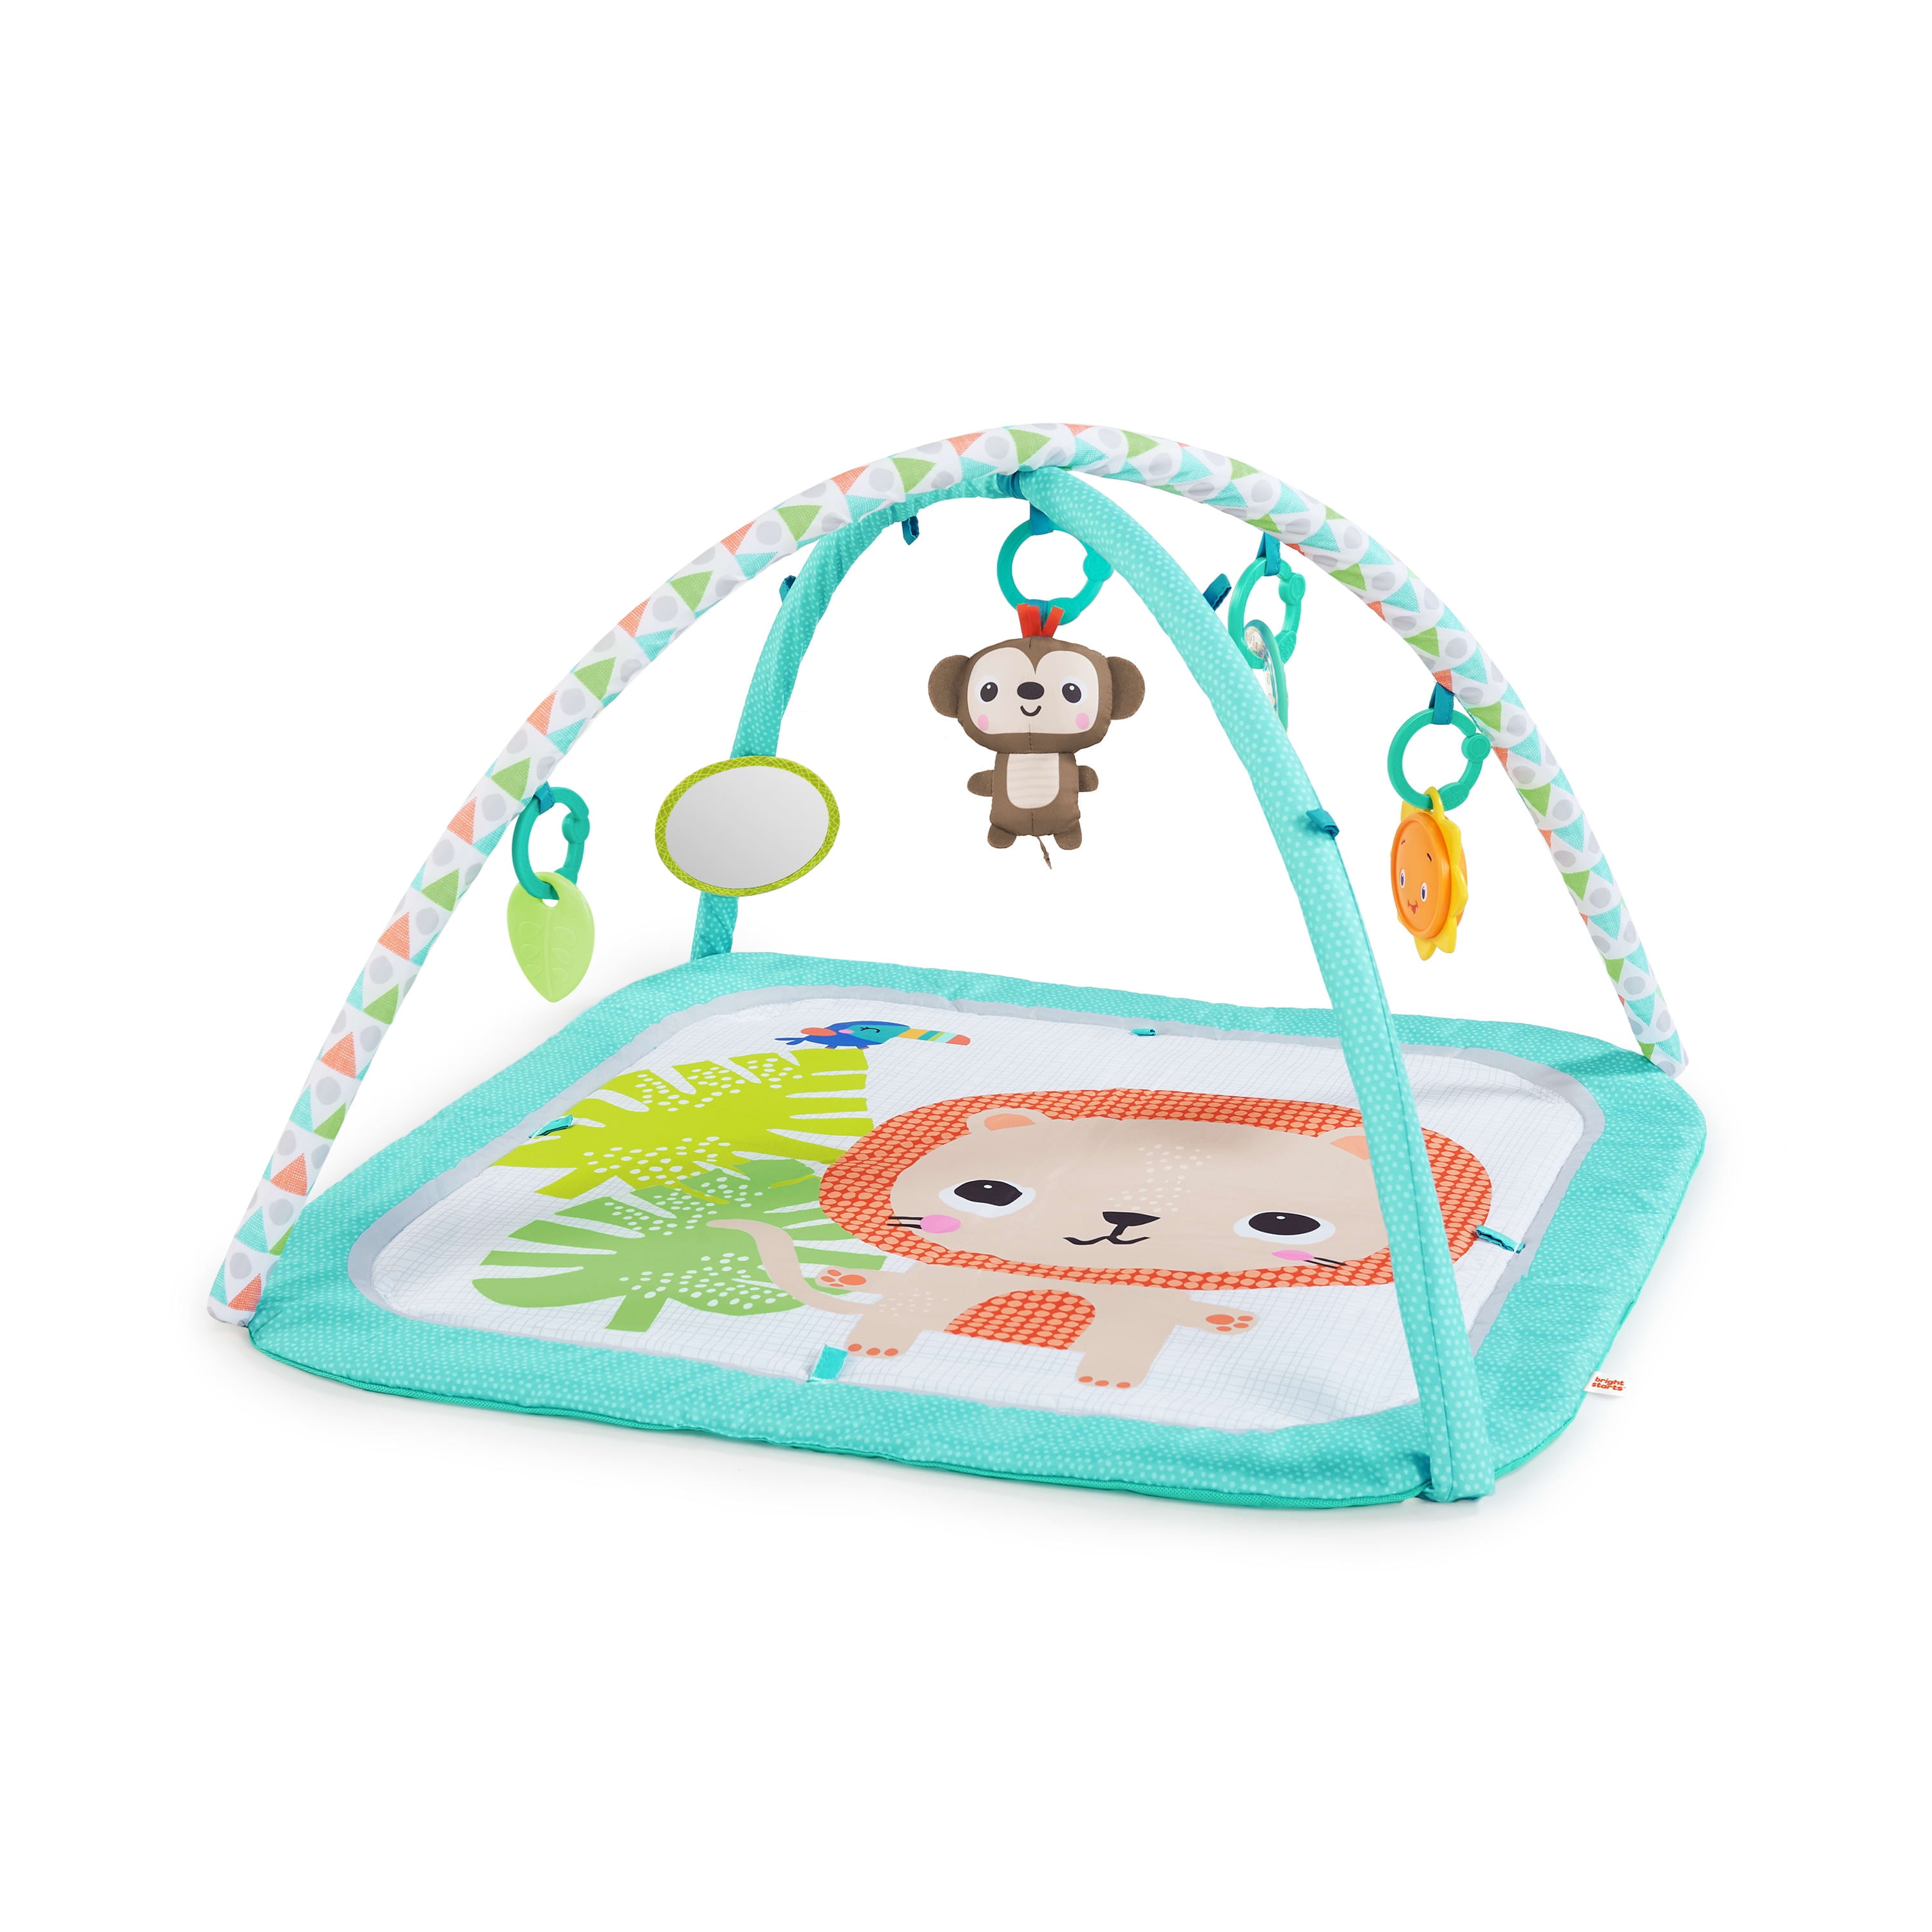 Baby Play Mat Blanket Activity Colouful Floor Playmat Cot Buggy Pram Mobile 